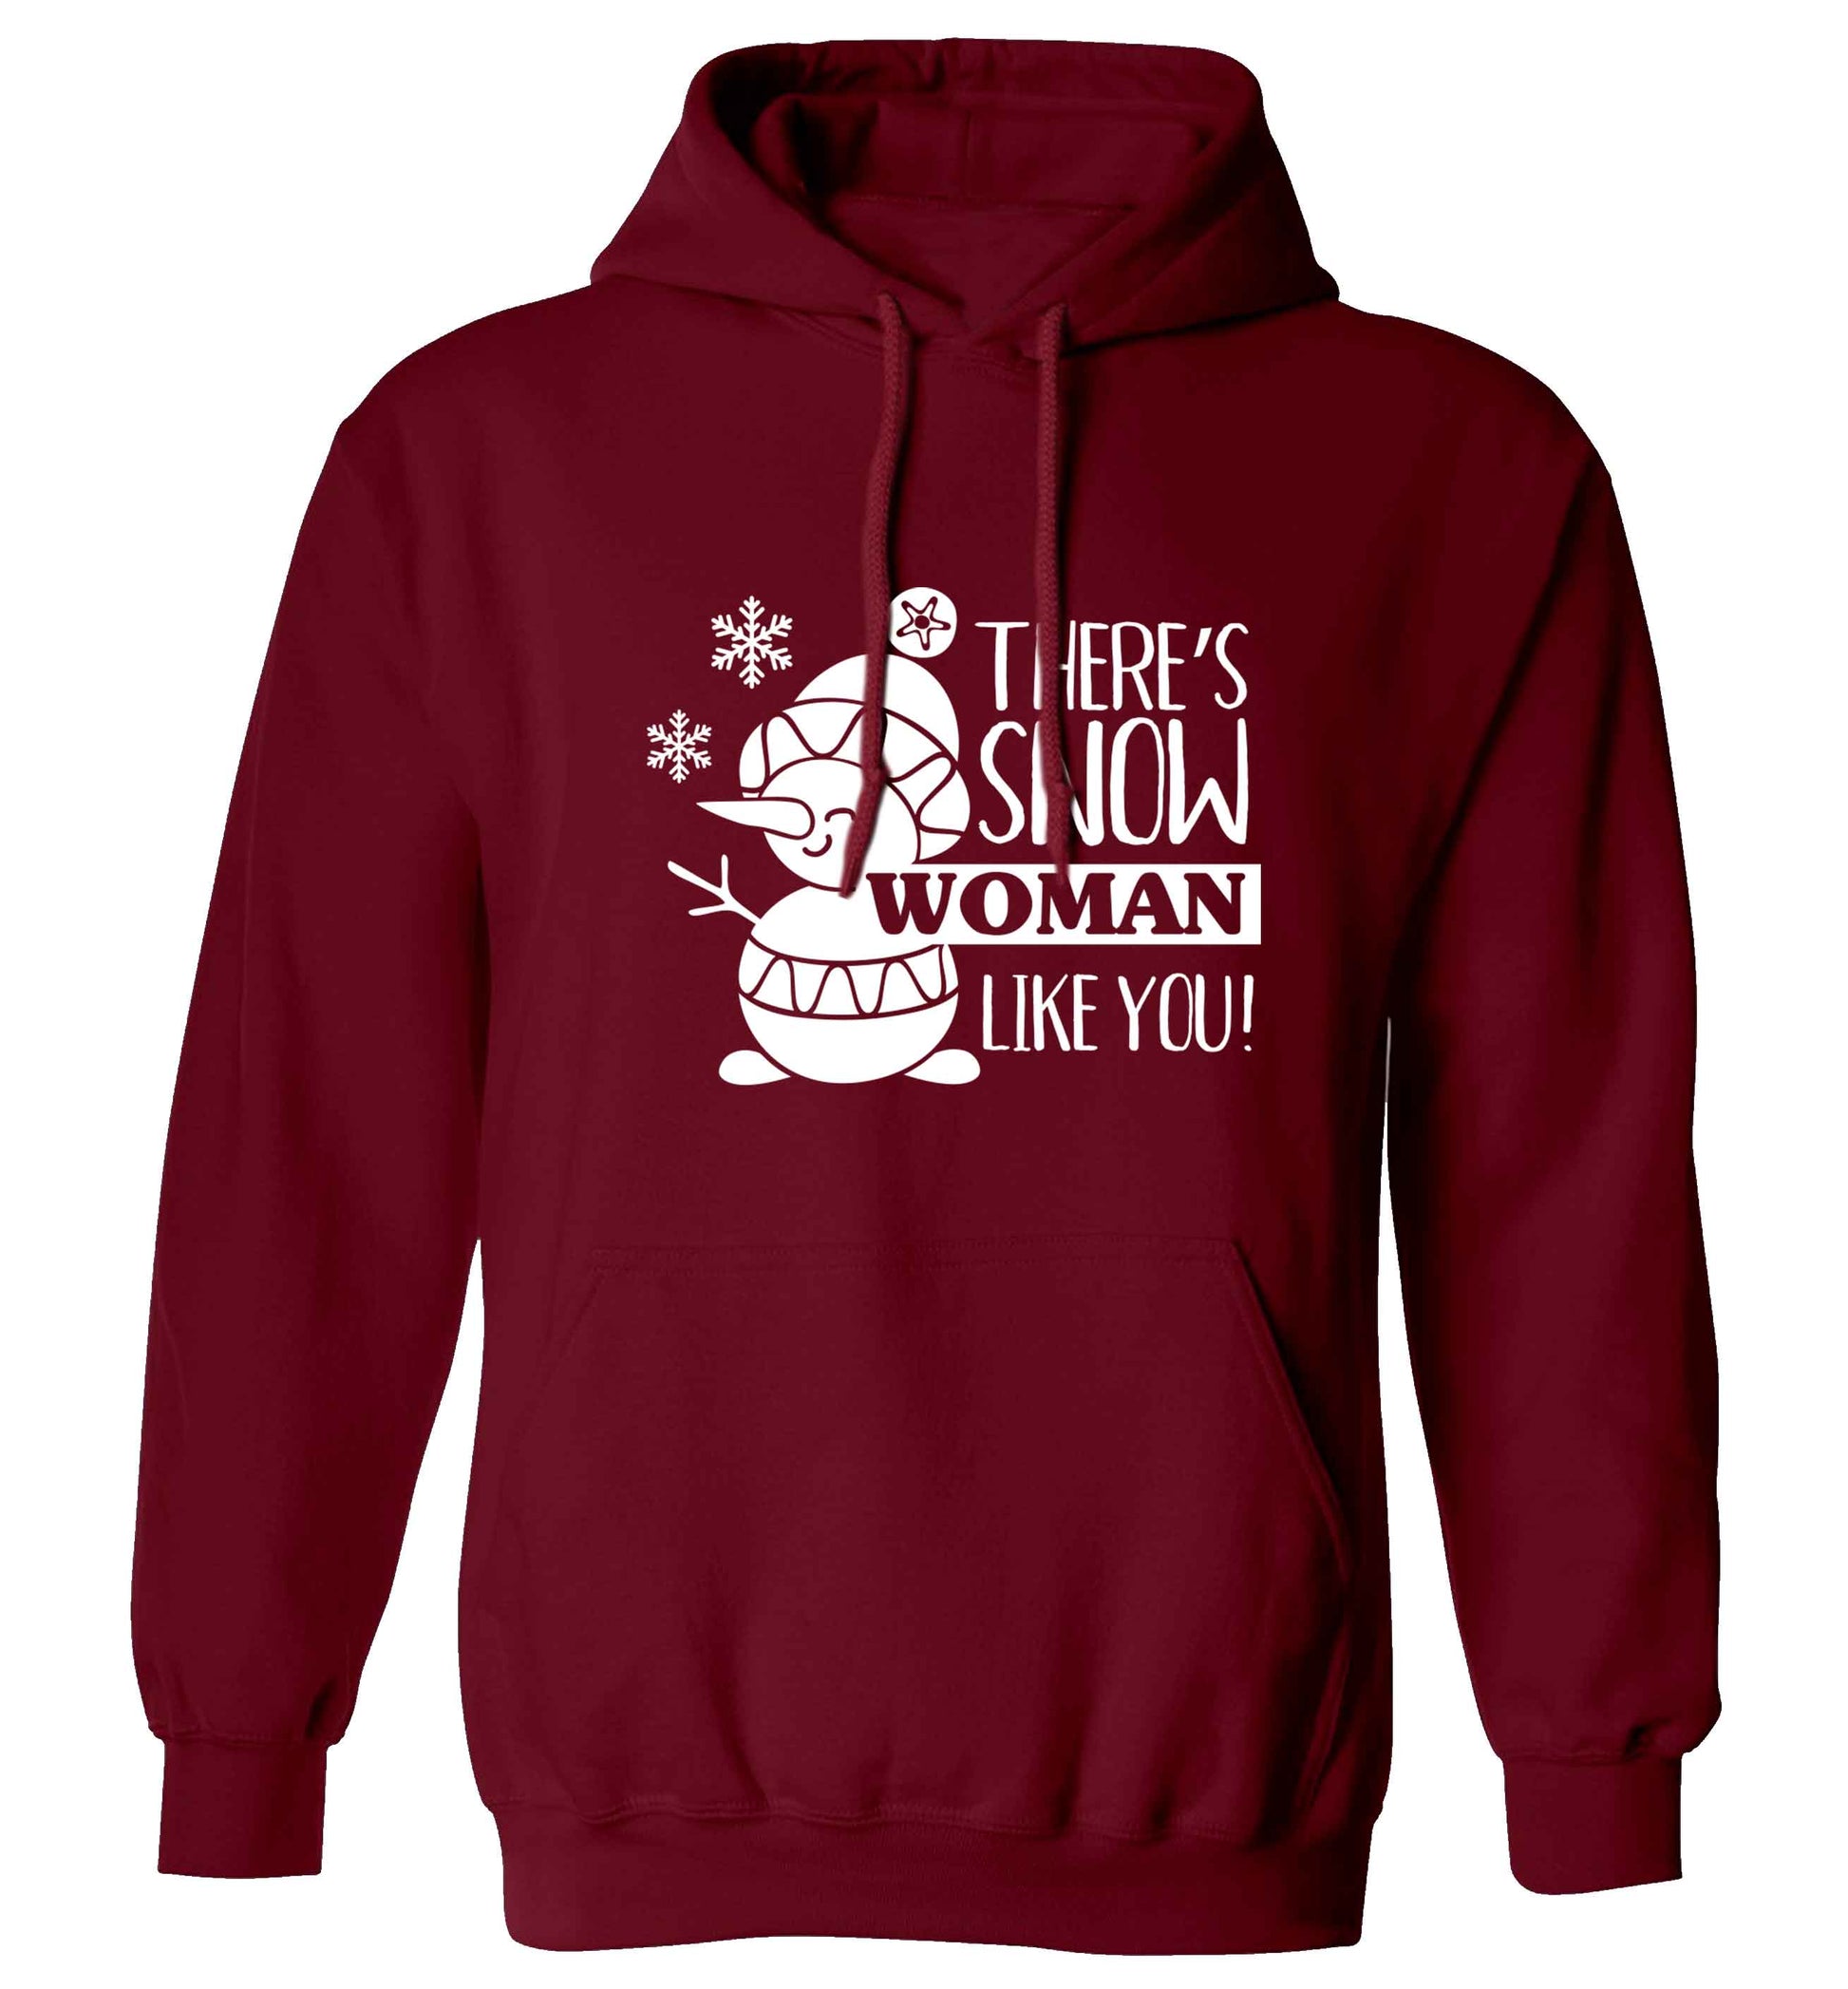 There's snow woman like you adults unisex maroon hoodie 2XL